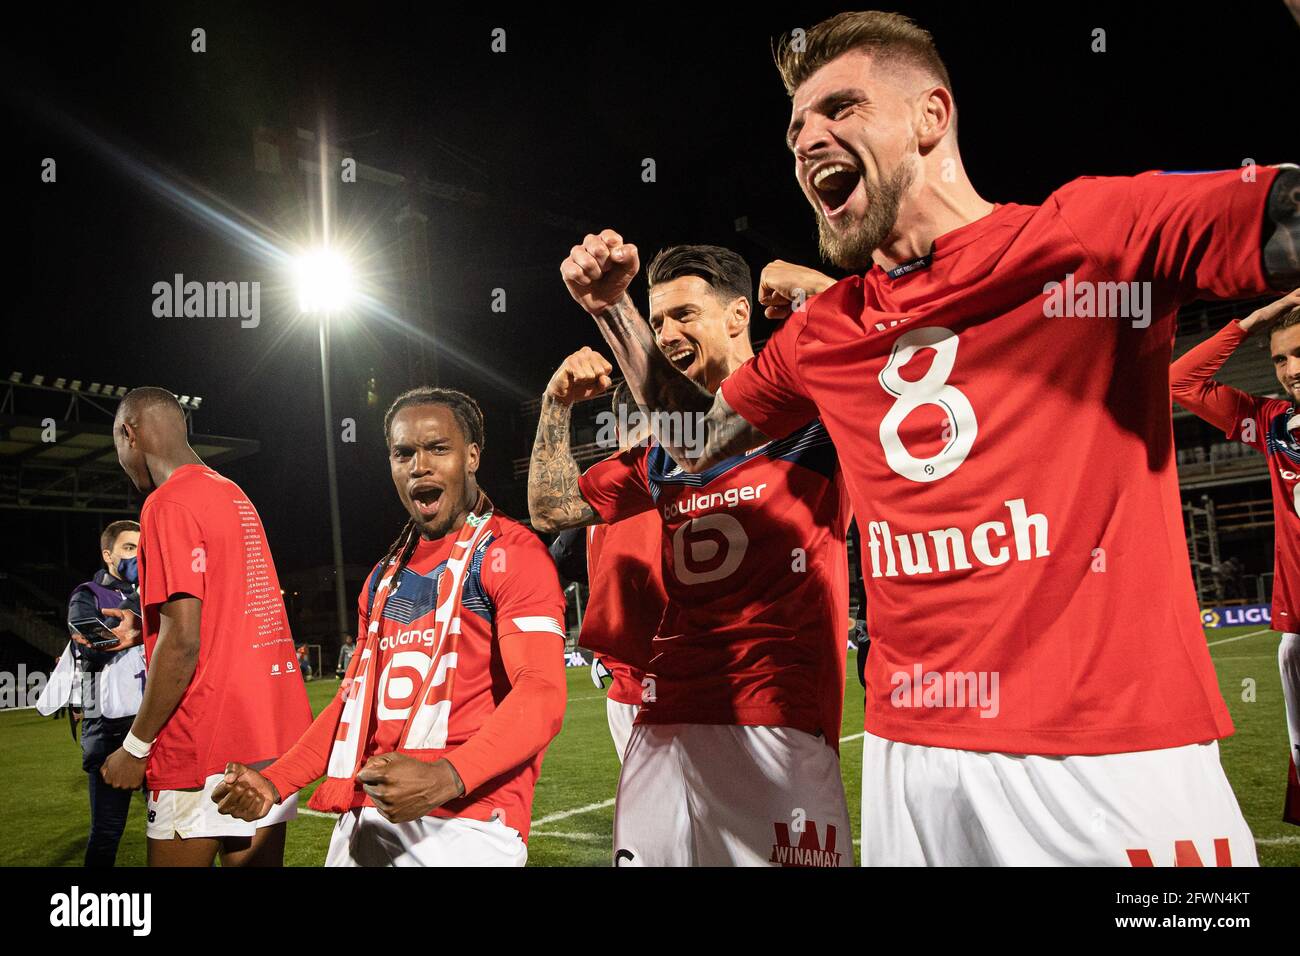 Angers, France. 23rd May, 2021. Lille's players celebrate after a French  Ligue 1 football match between Lille and Angers at Raymond Kopa stadium in  Angers, France, on May 23, 2021. Credit: Aurelien